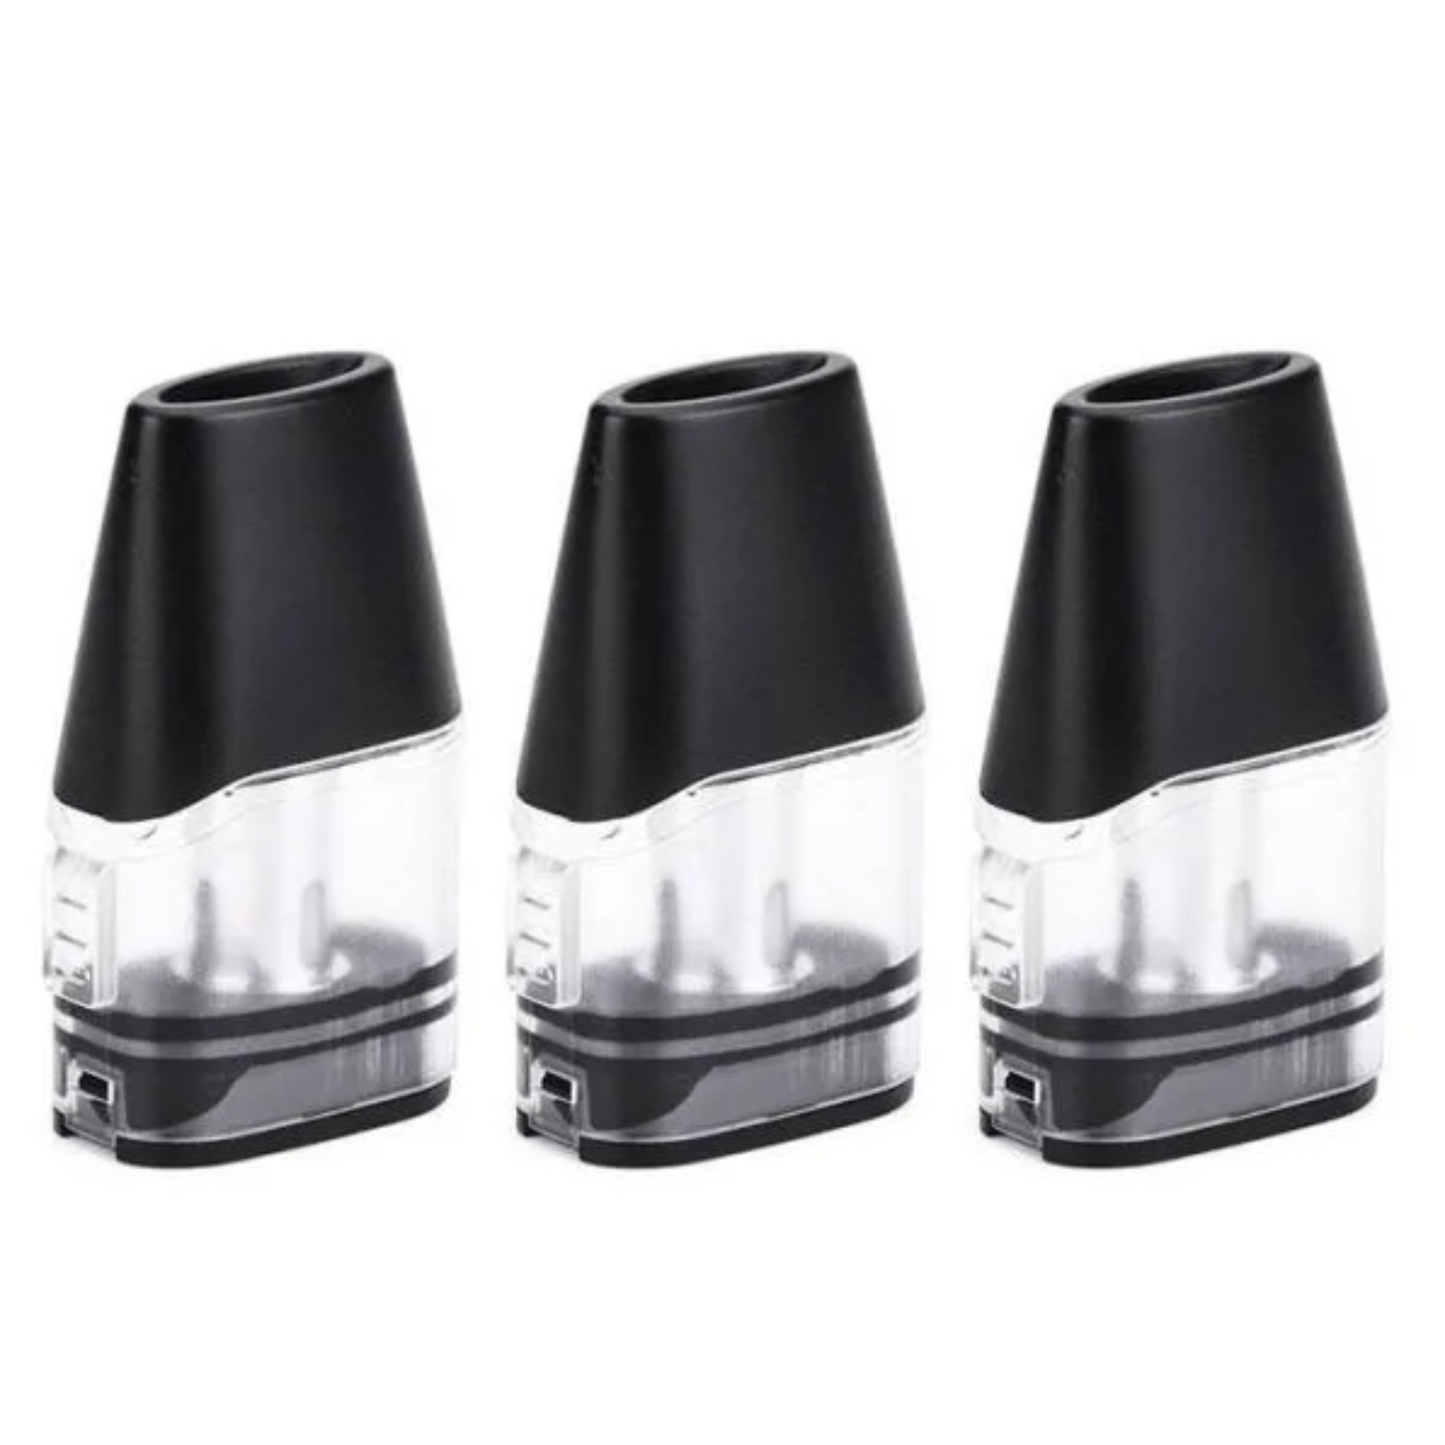 Geekvape Aegis ONE / 1FC Replacement Pods (3-Pack)